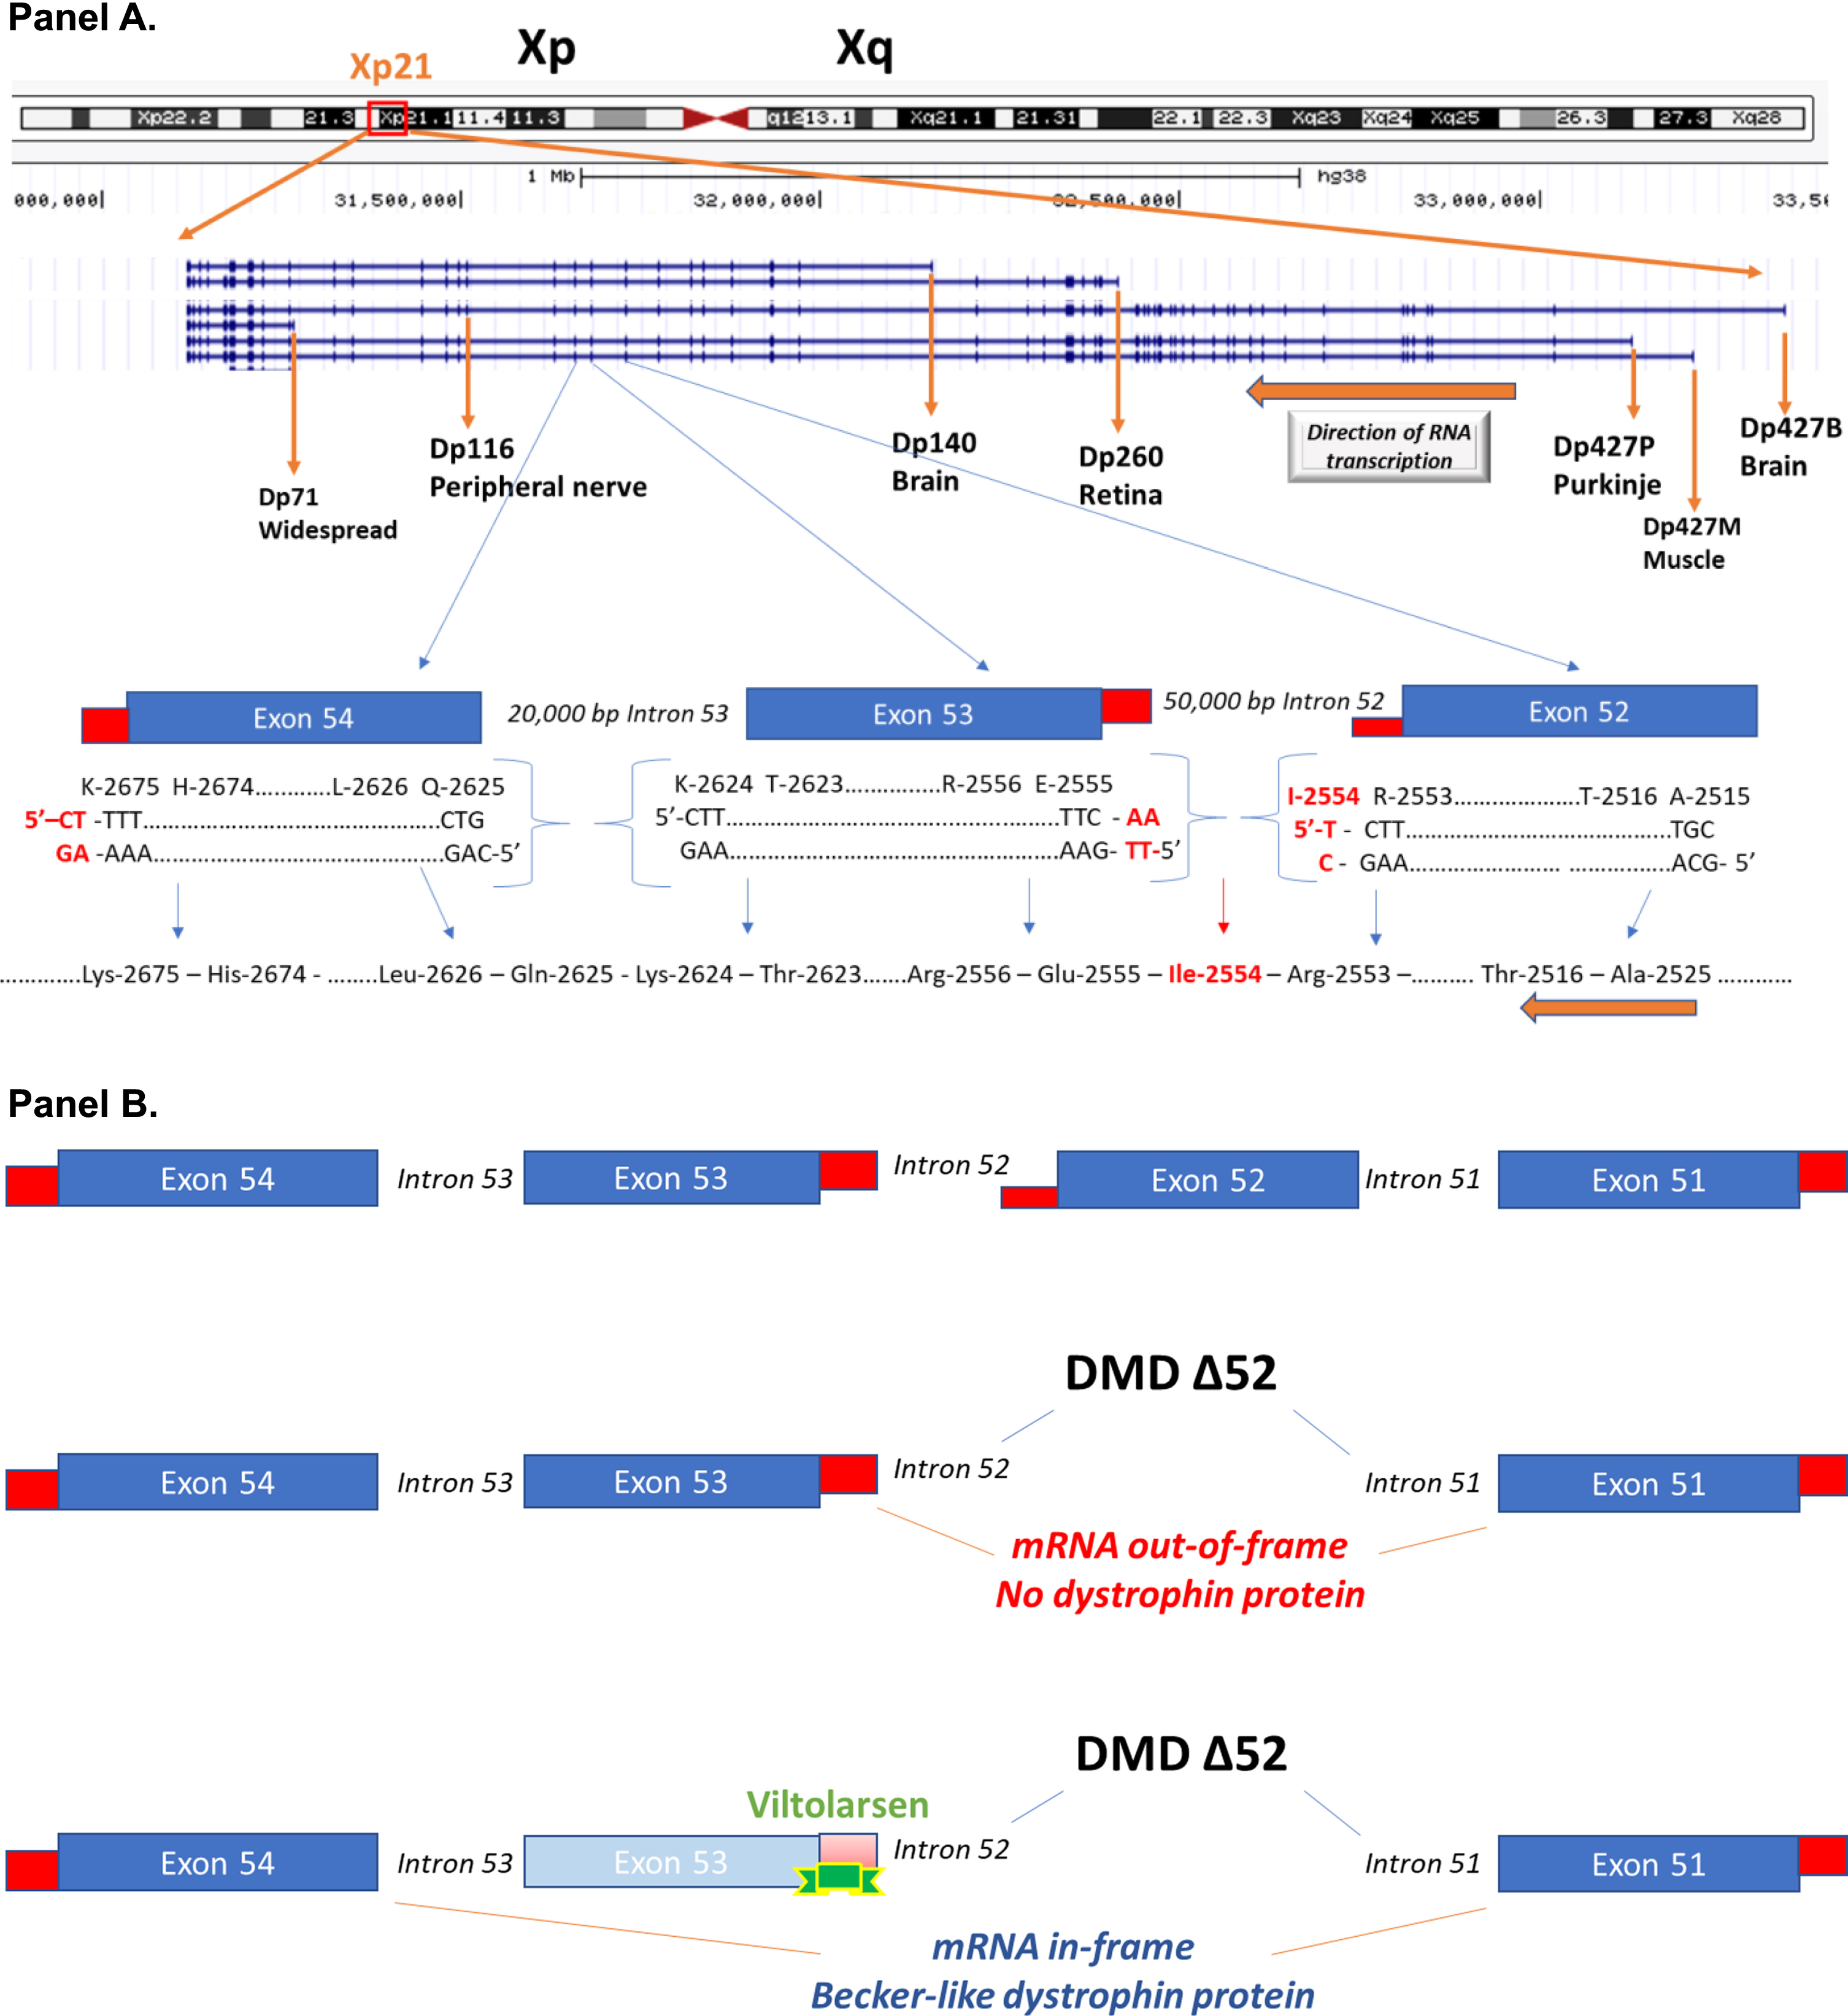 Schematic of the DMD gene and exon skipping. Panel A: A schematic of the DMD gene from the Genome Browser (genome.ucsc.edu) at Xp21 with encoded mRNA transcripts is shown. Gene transcription is shown from left to right, with the three gene promoters driving expression of the full-length 427 kDa dystrophin (Dp427B, Dp427M, Dp427P), as well as down-stream gene promoters driving smaller molecular weight dystrophin proteins (Dp260, Dp140, Dp116, Dp71). Also shown is an expansion of exons 52, 53, and 54. The amino acids and encoding triplet codons are provided at the ends of each of these exons. Exon 52 ends in an incomplete codon for isoleucine (I-2554), requiring the last two bases from exon 53 to complete the codon. In contrast, exon 53 ends with a complete codon for lysine (K-2624), splicing to exon 54 that starts with a complete codon for glutamine (Q-2625). A gene mutation deleting exon 53 would then be out-of-frame, as an incomplete codon ending exon 52 would be fused to a complete codon on exon 54, leading to a frame shift in the resulting dystrophin mRNA. Panel B: This shows the consequence of drug-induced exon skipping by viltolarsen targeted to exon 53. A boys with DMD is shown as having a deletion mutation of exon 52, and when this patient’s dystrophin mRNA splices together the remaining exons (exon 51 to exon 52), this leads to a frame shift, mRNA out-of-frame, and no dystrophin protein. Viltolarsen binds to exon 53, and blocks its inclusion in the dystrophin mRNA. The drug-induced splicing of exon 51 to exon 54 results in an in-frame dystrophin mRNA, and Becker-like dystrophin protein.